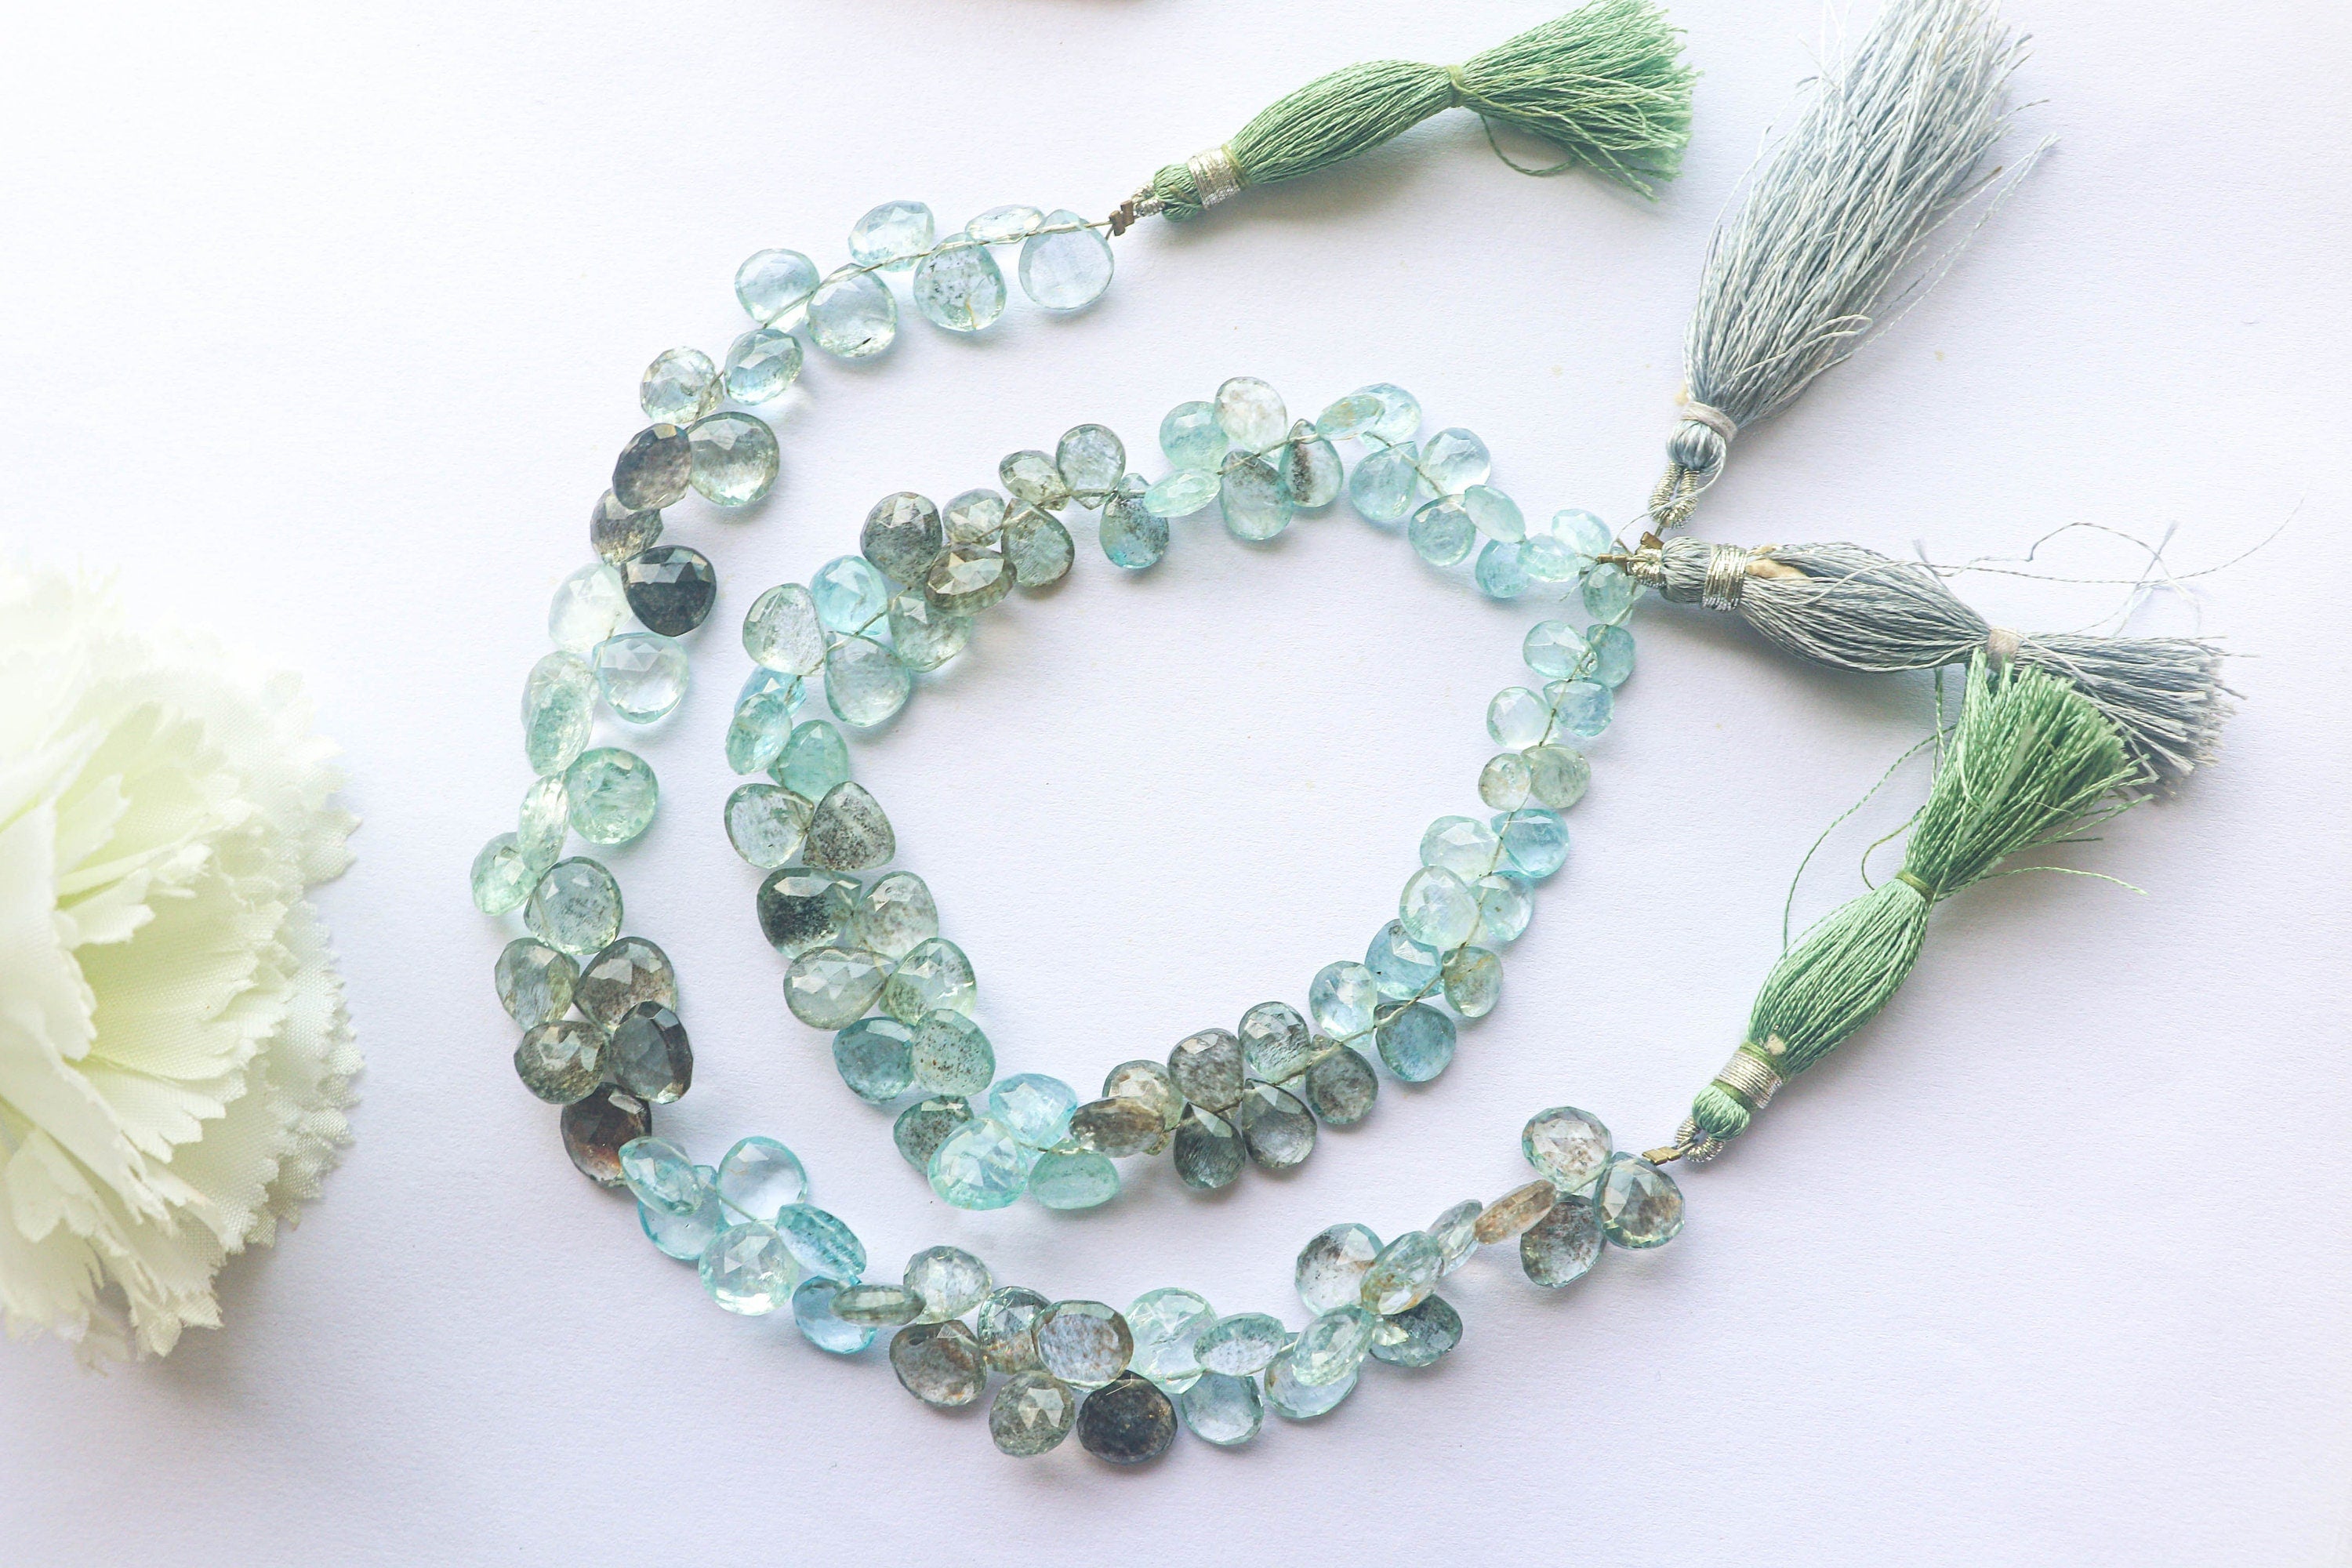 Moss Aquamarine Faceted Heart Shape Briolette | 6-10mm | 63 Pieces Full Strand | 9 Inch | Natural Moss Aquamarine | Beadsforyourjewellery Beadsforyourjewelry